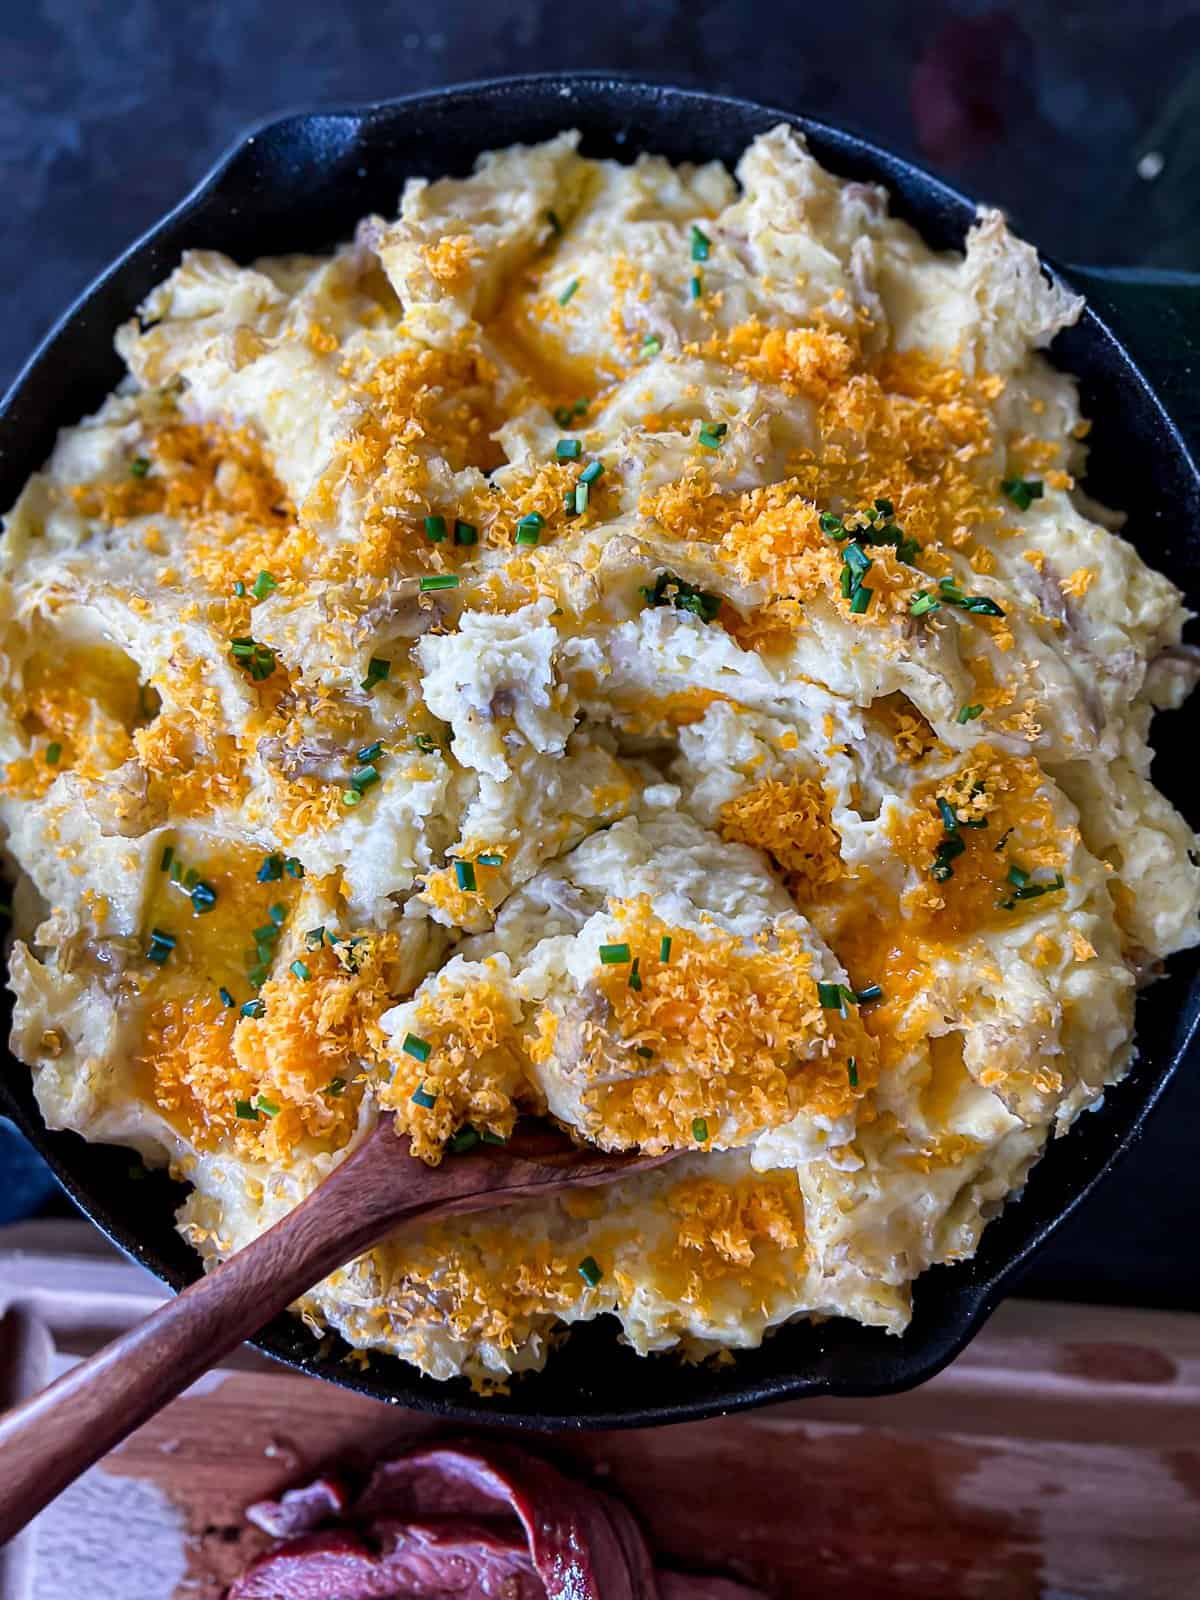 Smoked side dish Traeger recipe for mashed potatoes